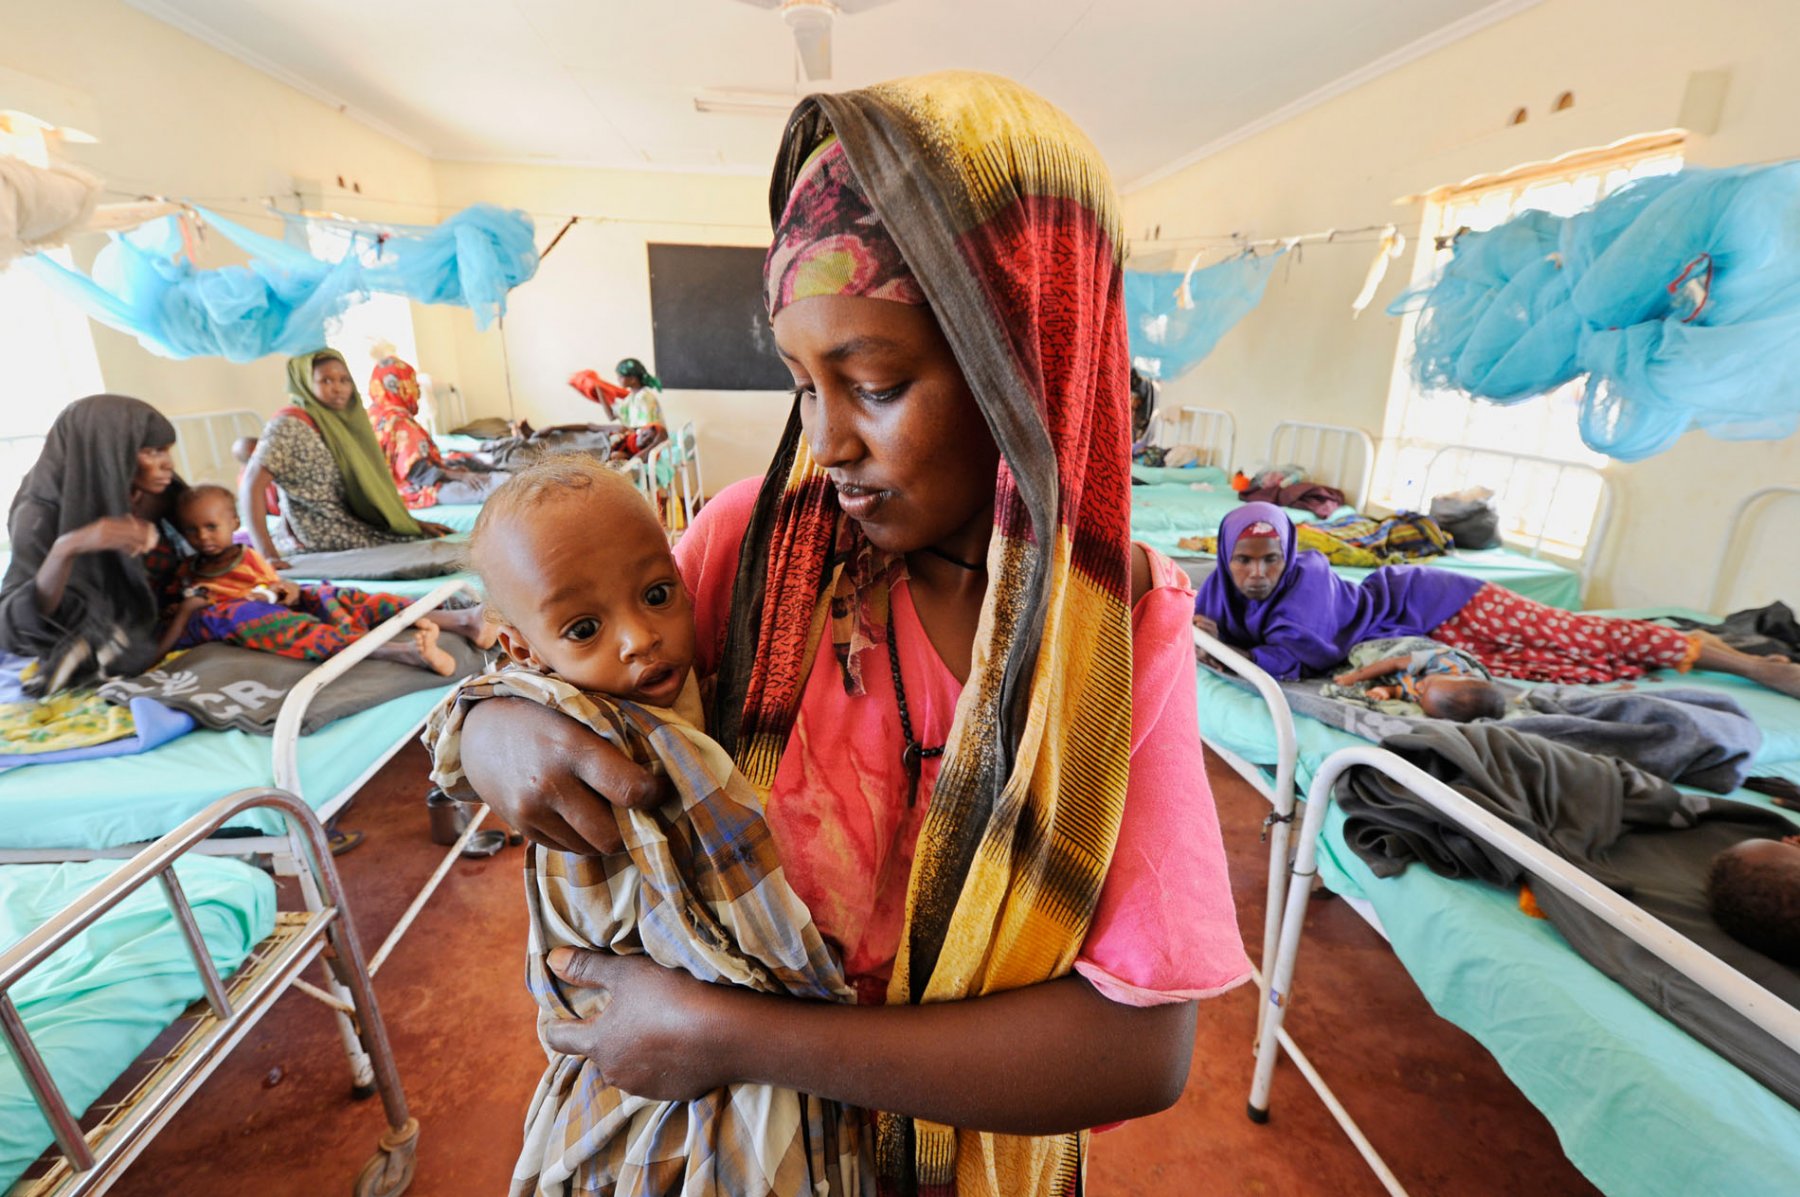 A somalian mother cradles her malnourished baby in a field hospital in a refugee camp in Dadaab, northeastern Kenya on wednesday, August 3rd 2011. Somalia and parts of Kenya have been struck by one of the worst droughts and famines in six decades, more than 350.000 refugees have found shelter in the worlds biggest refugee camp. Foto: Boris Roessler dpa